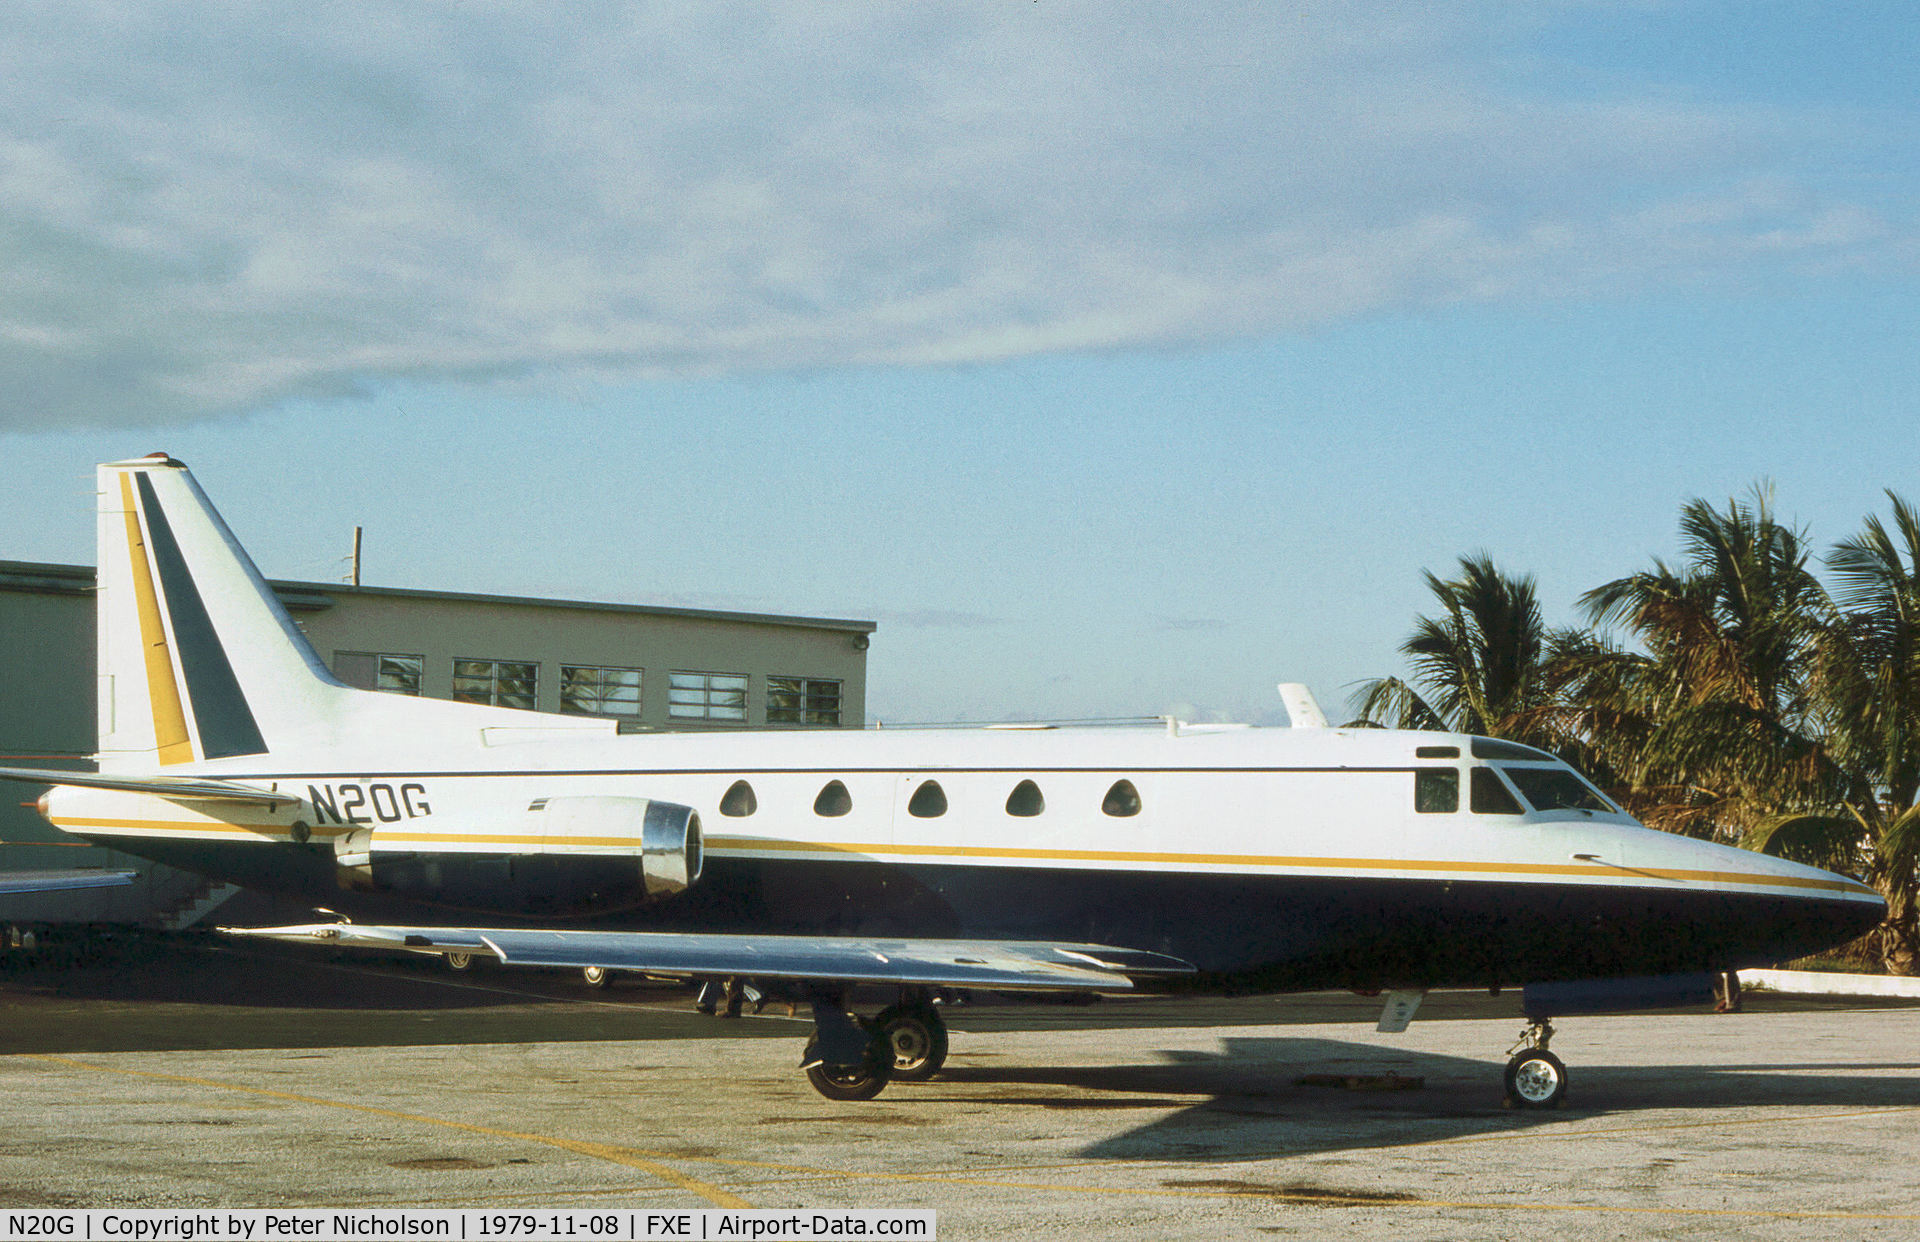 N20G, 1970 Rockwell International NA-265-60 Sabreliner 60 C/N 306-59, Sabre 60 operated by Goodyear Tire & Rubber Company as seen at Fort Lauderdale Executive in November 1979.